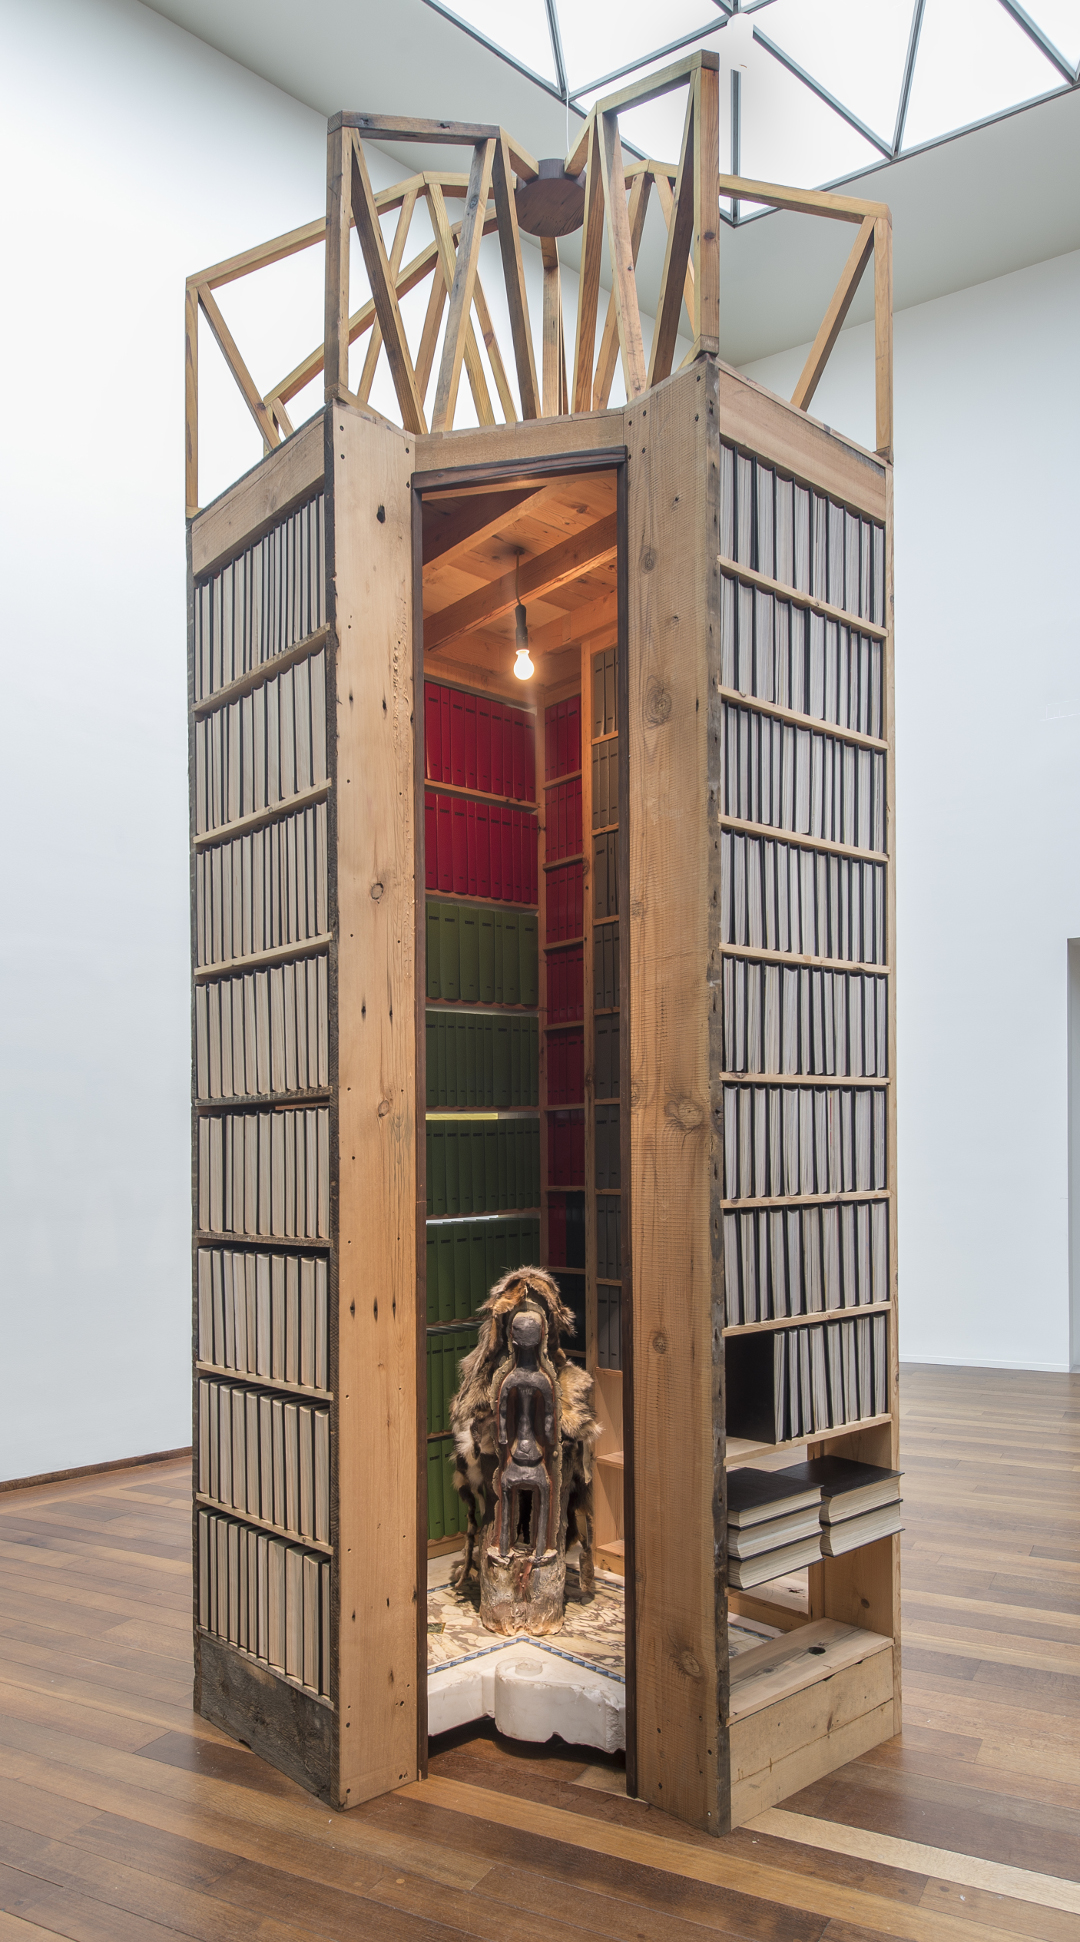 Installation view of New Egypt Sanctuary of the Holy Word and Image and Elegua in Winter, 2017 On view in Theaster Gates: The Minor Arts Courtesy of the artist, White Cube, and Regen Projects National Gallery of Art, Washington